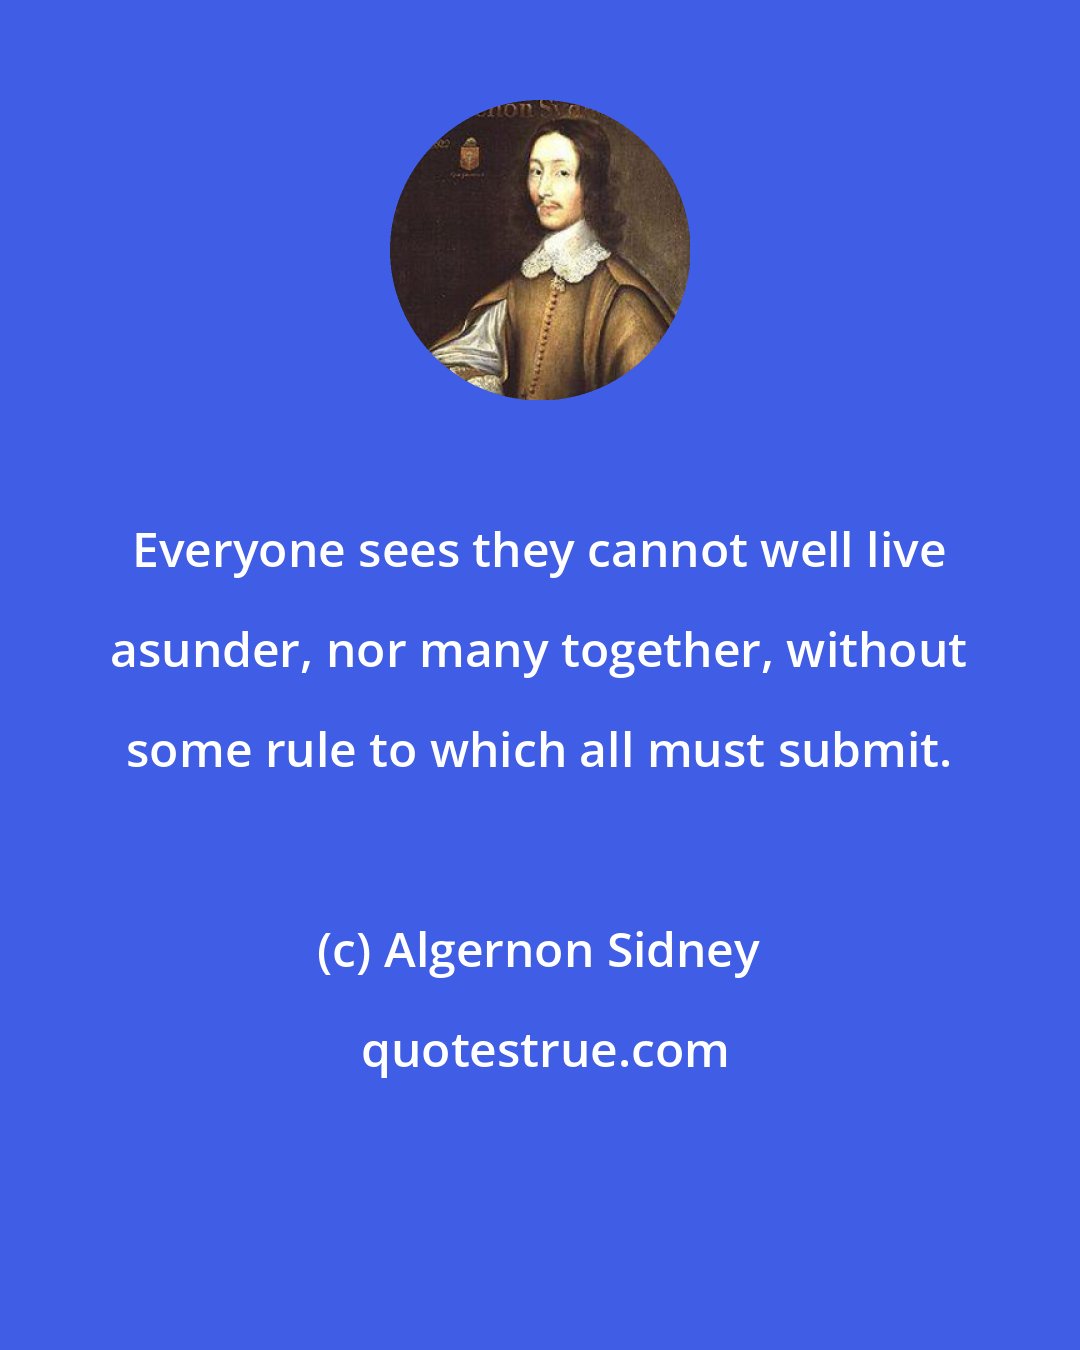 Algernon Sidney: Everyone sees they cannot well live asunder, nor many together, without some rule to which all must submit.